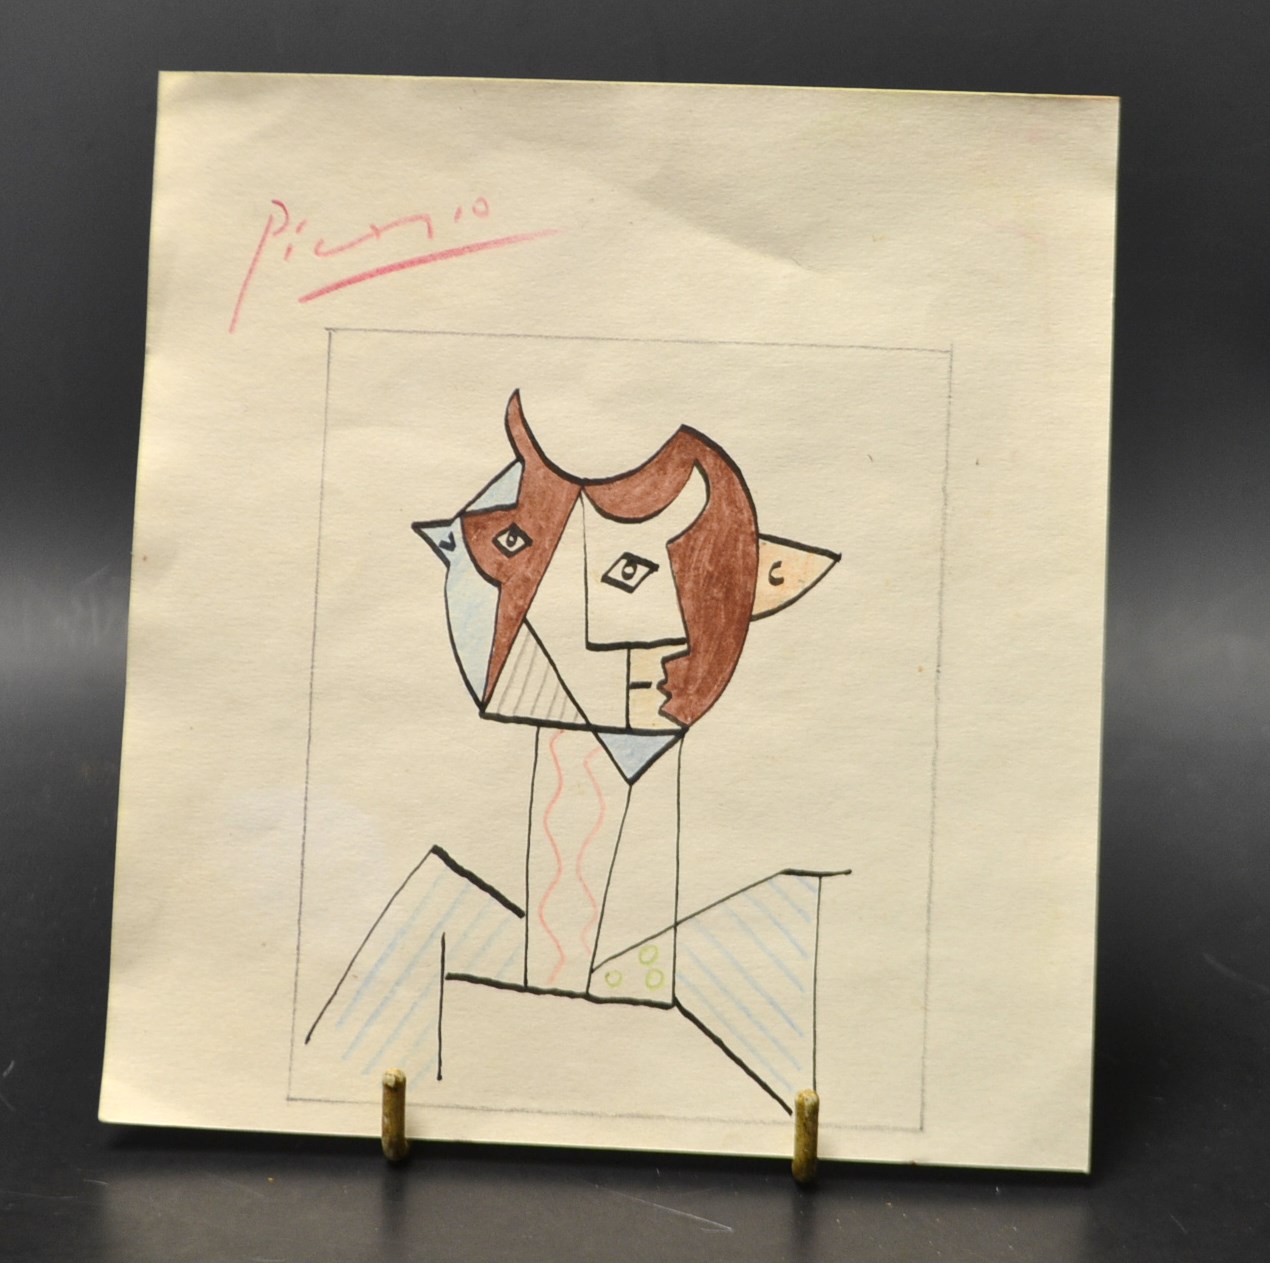 Picasso
Portrait in Cubist Style 
bears signature, ink sketch with colour on paper,